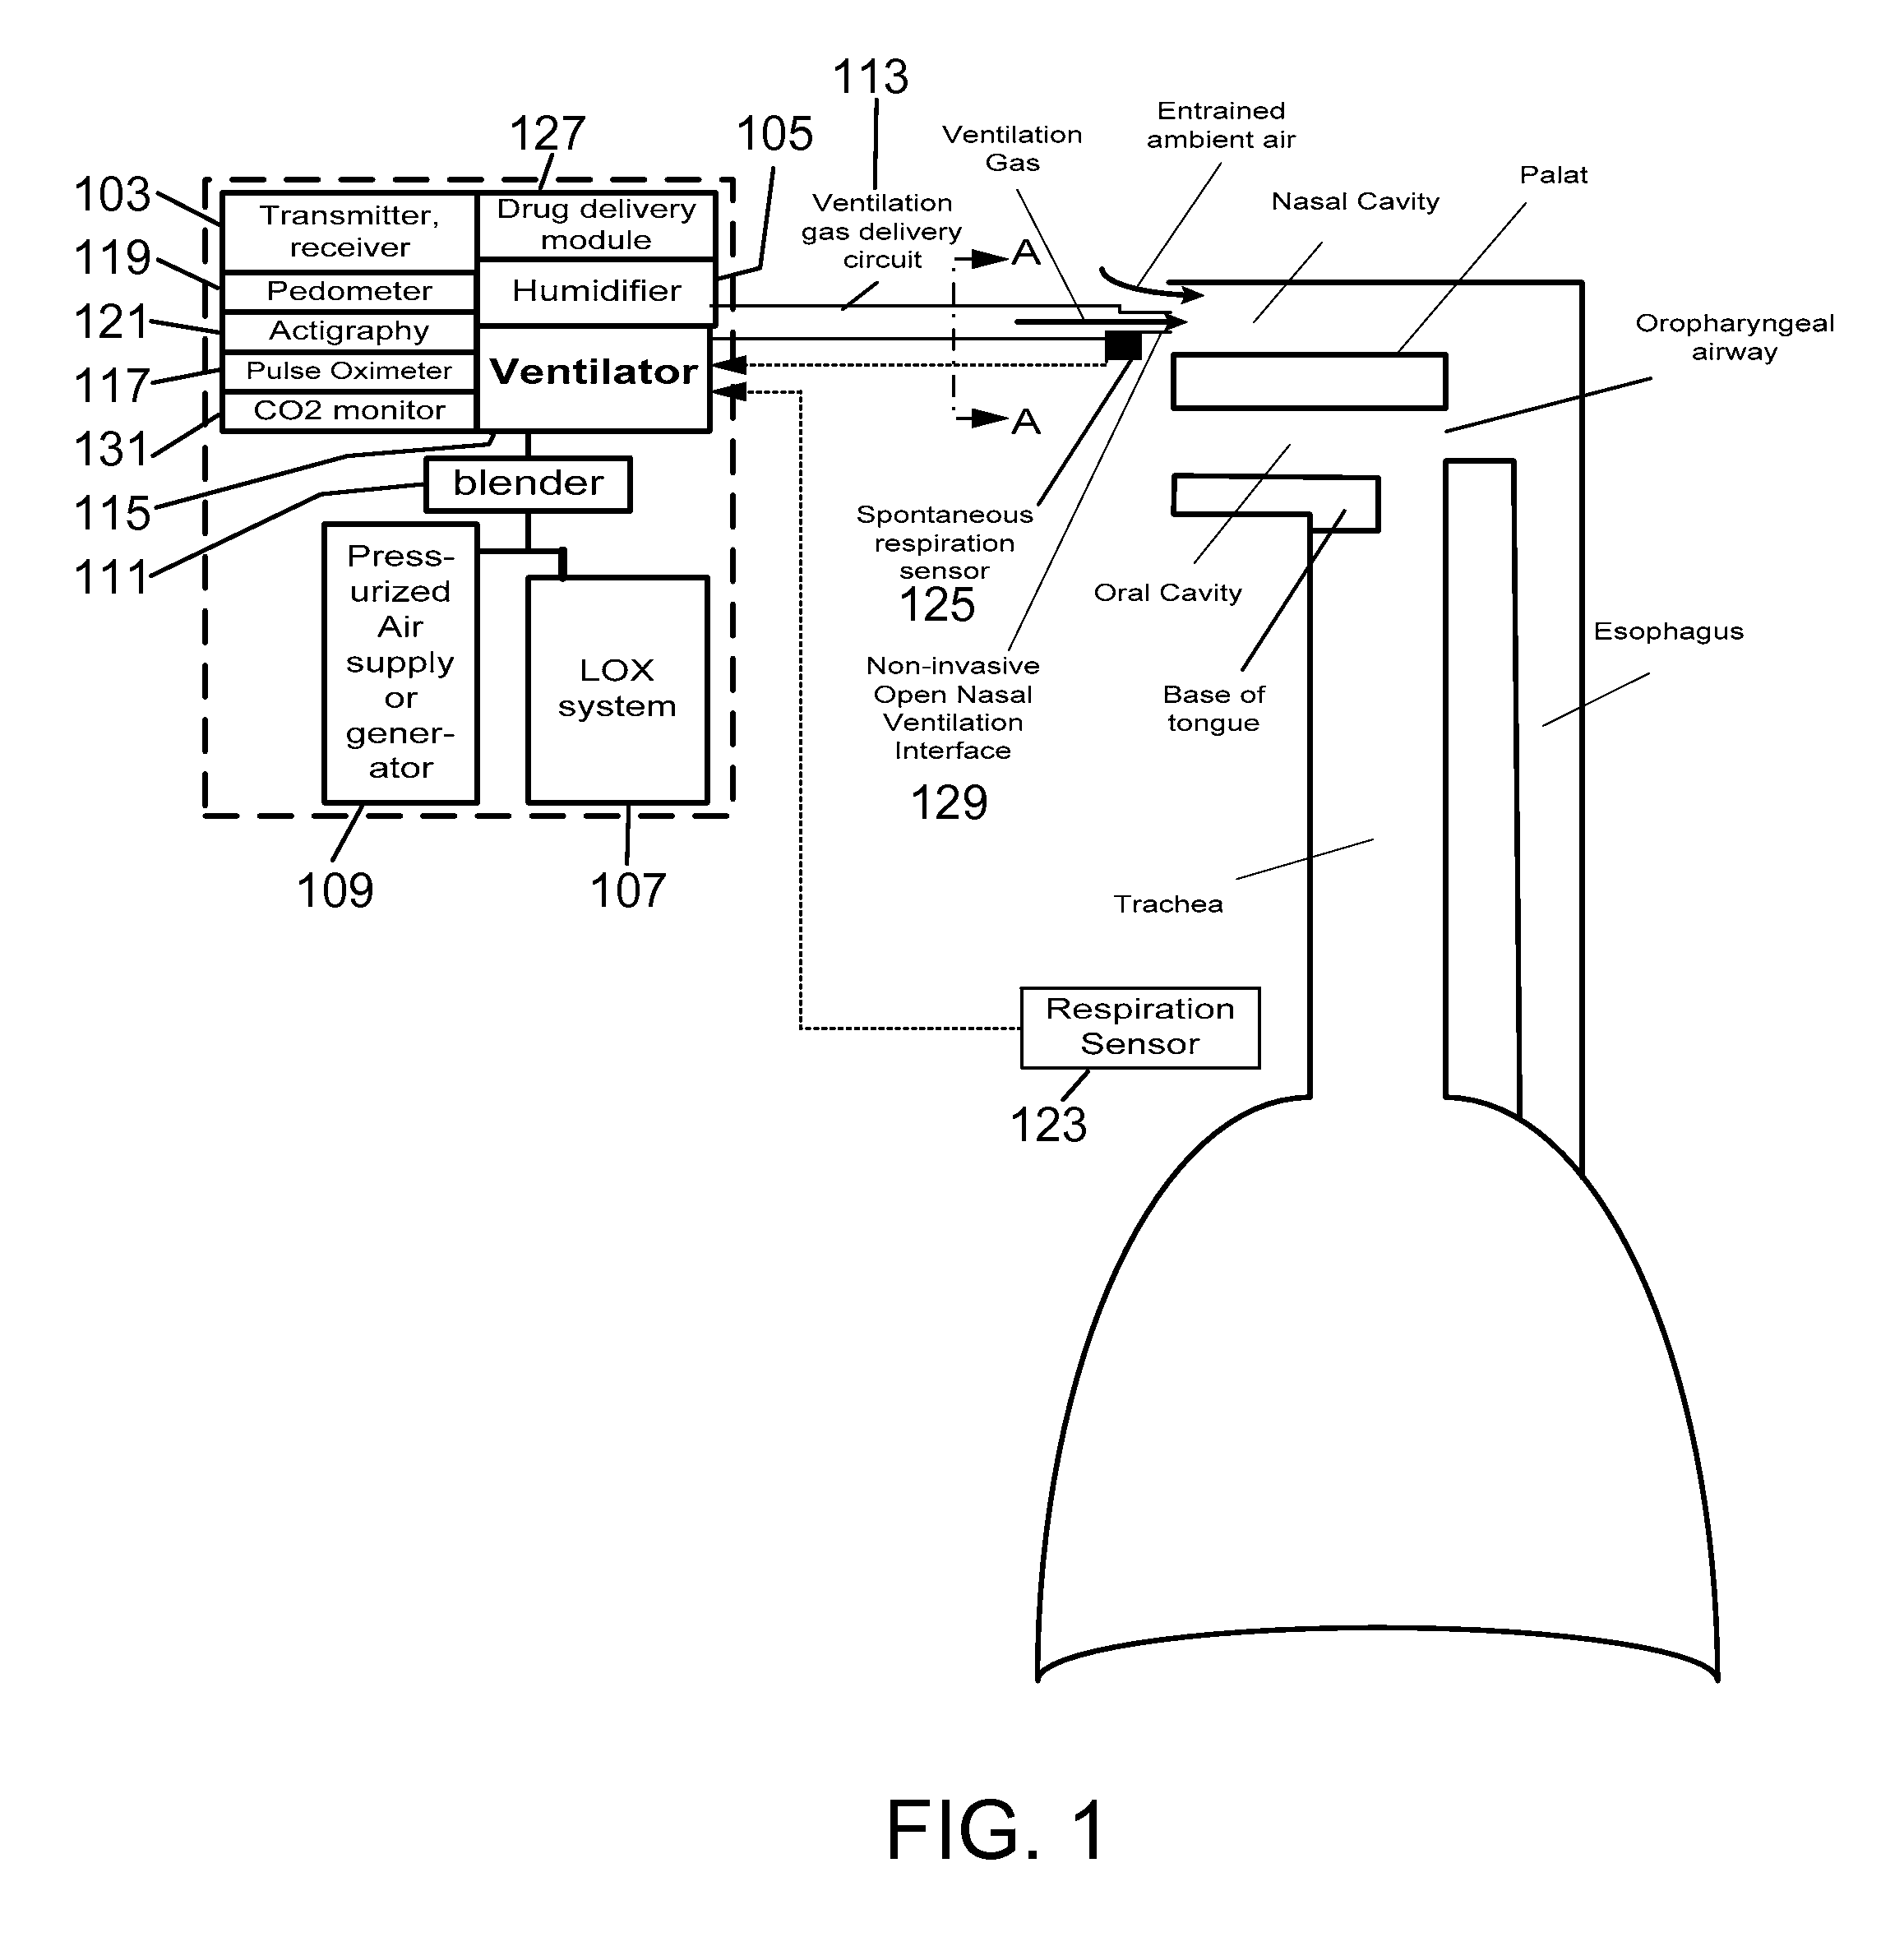 Methods, systems and devices using lox to provide ventilatory support